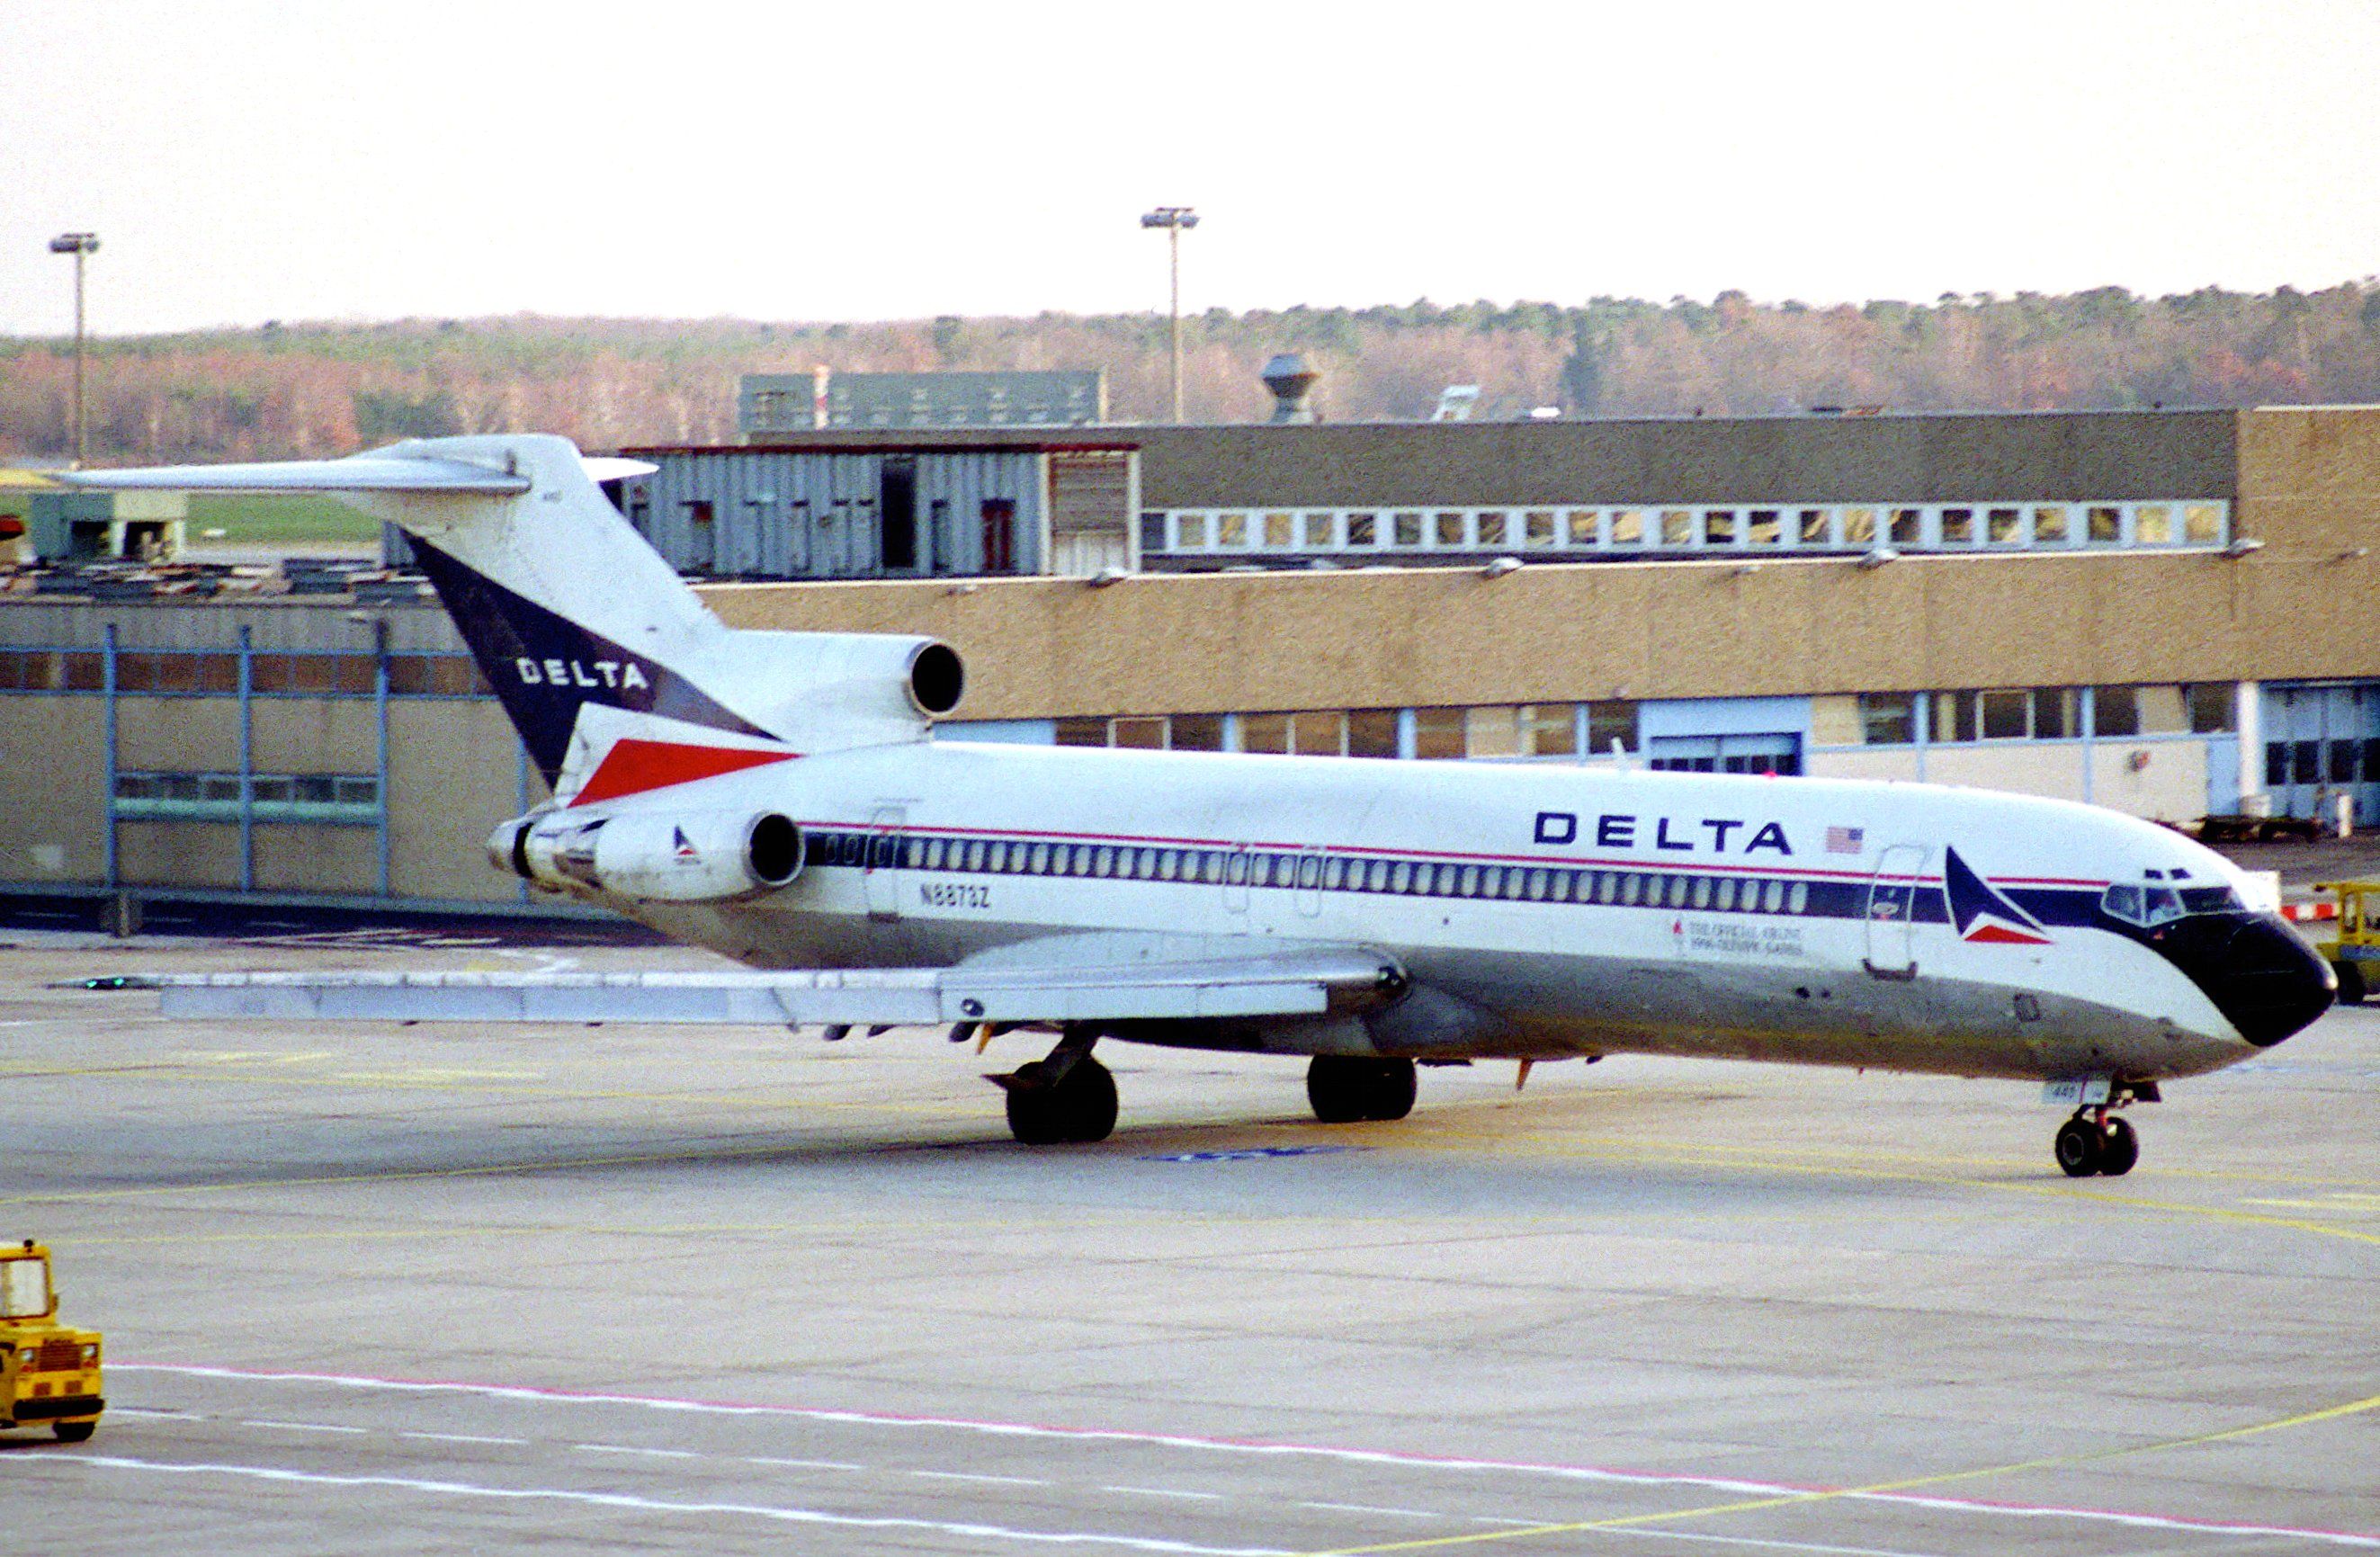 A Delta Air Lines Boeing 727 parked at an airport.